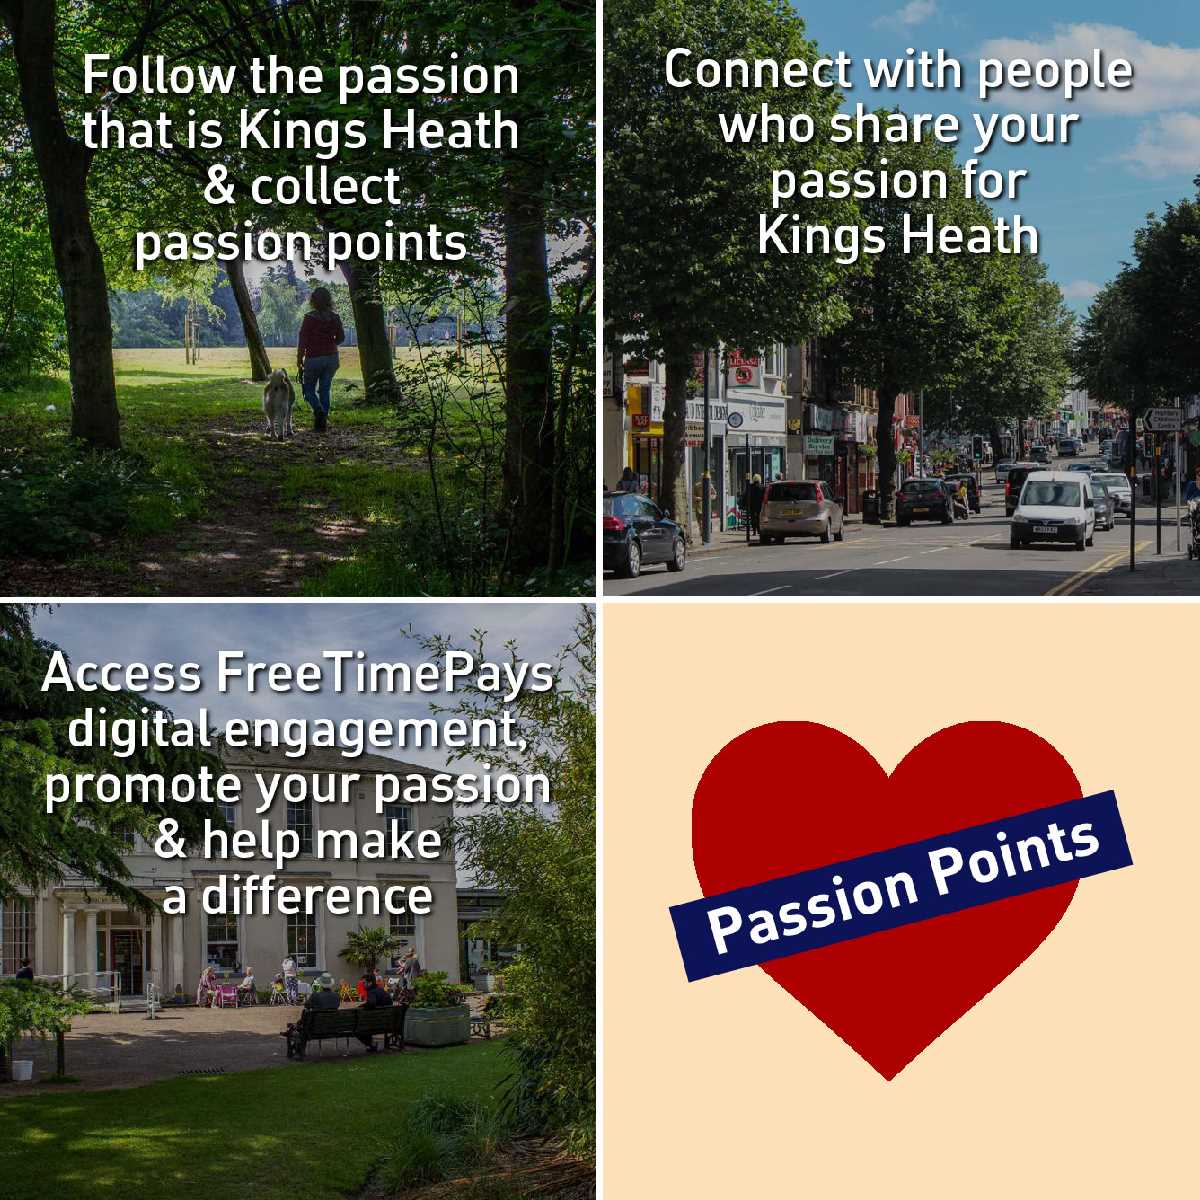 Are you passionate about Kings Heath? Join Us!